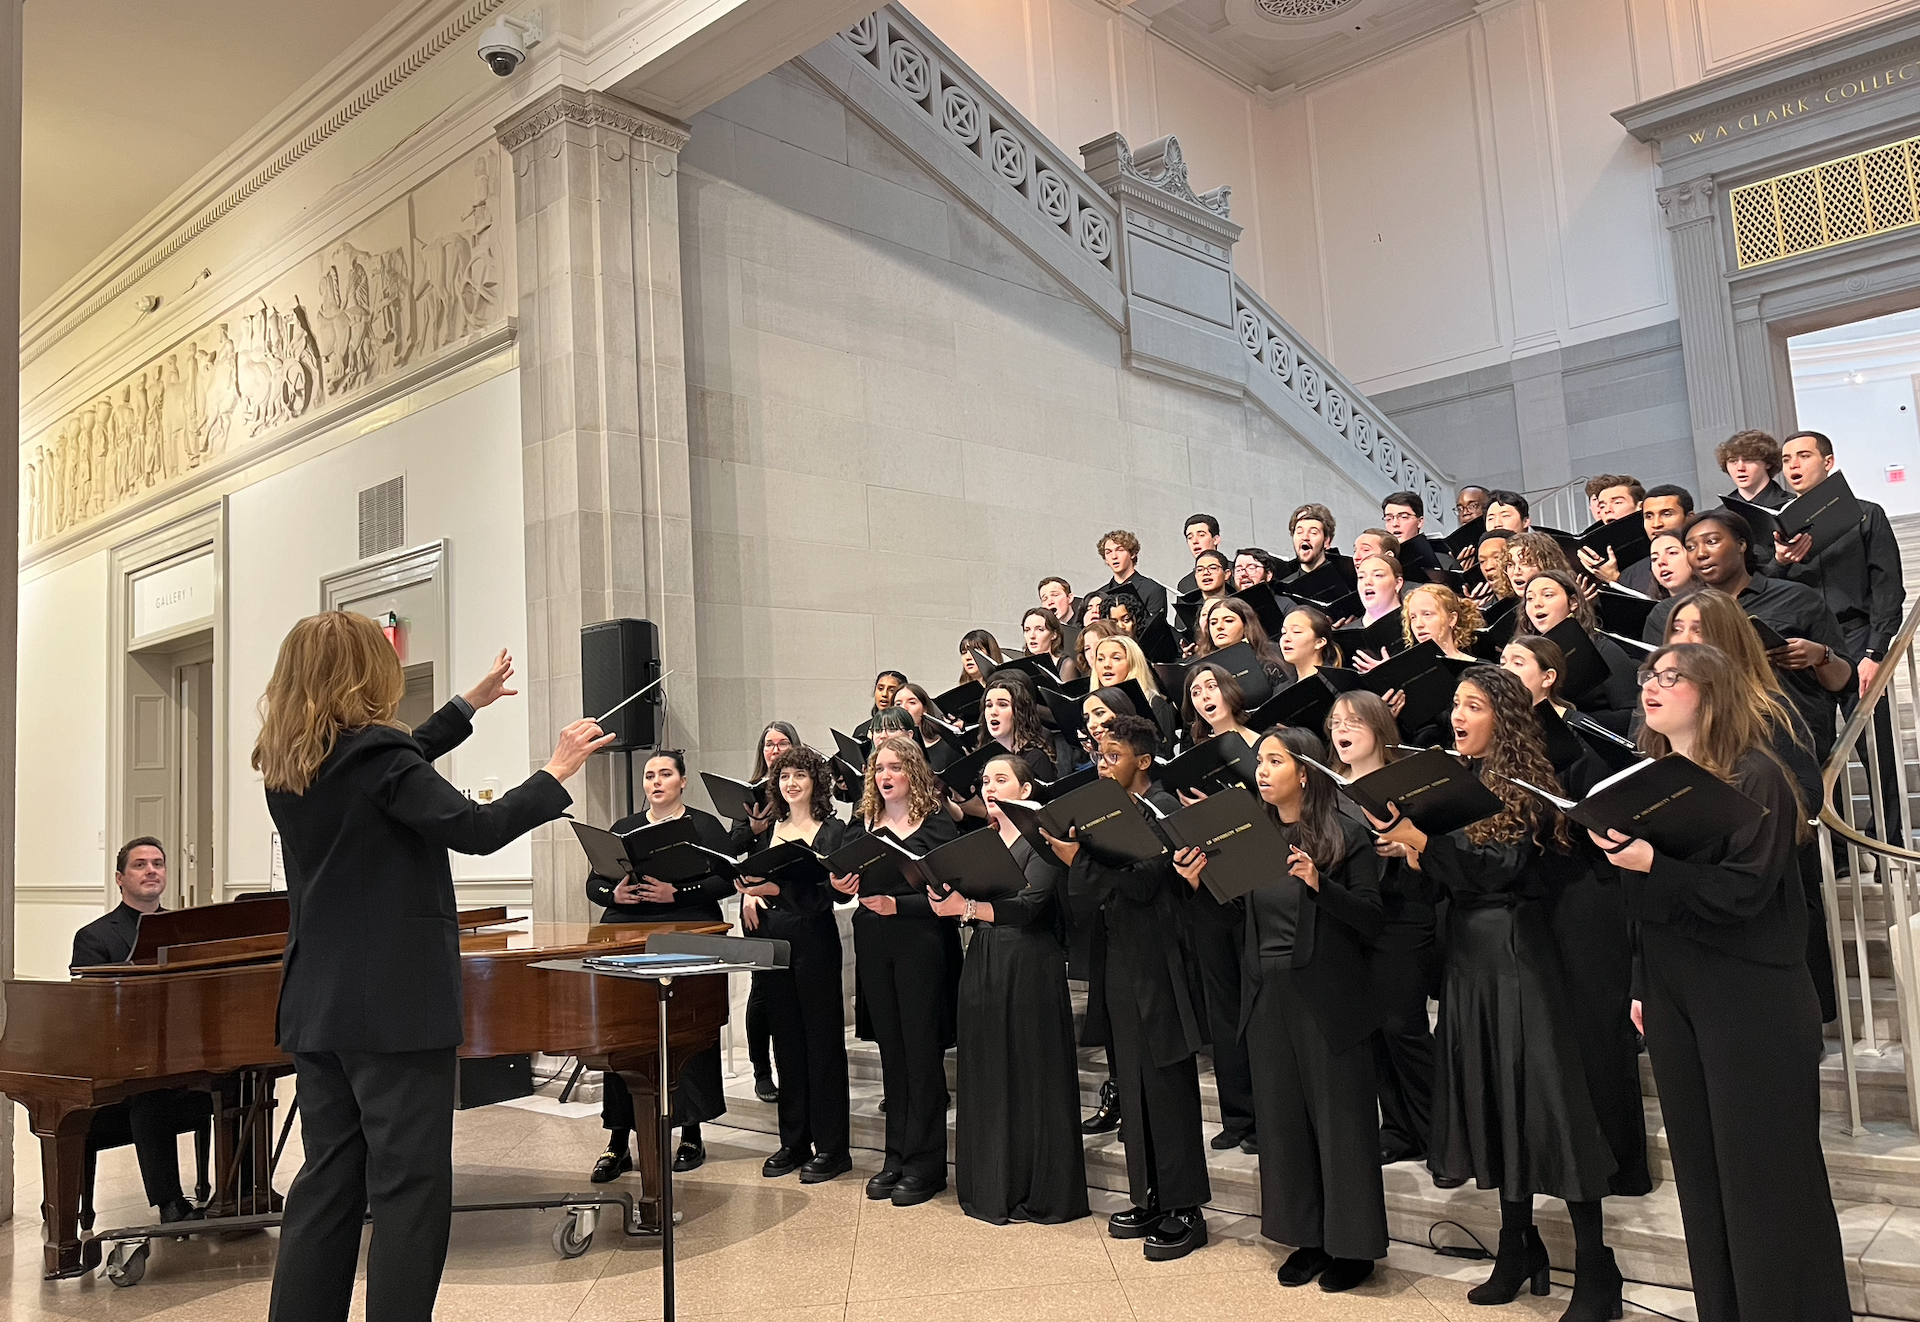 Conductor Erin Freeman directing the University Singers, who are dressed in black concert attire, standing in rows on steps. Next to Erin Freeman (also dressed in black) is a man seated at and playing a brown grand piano.